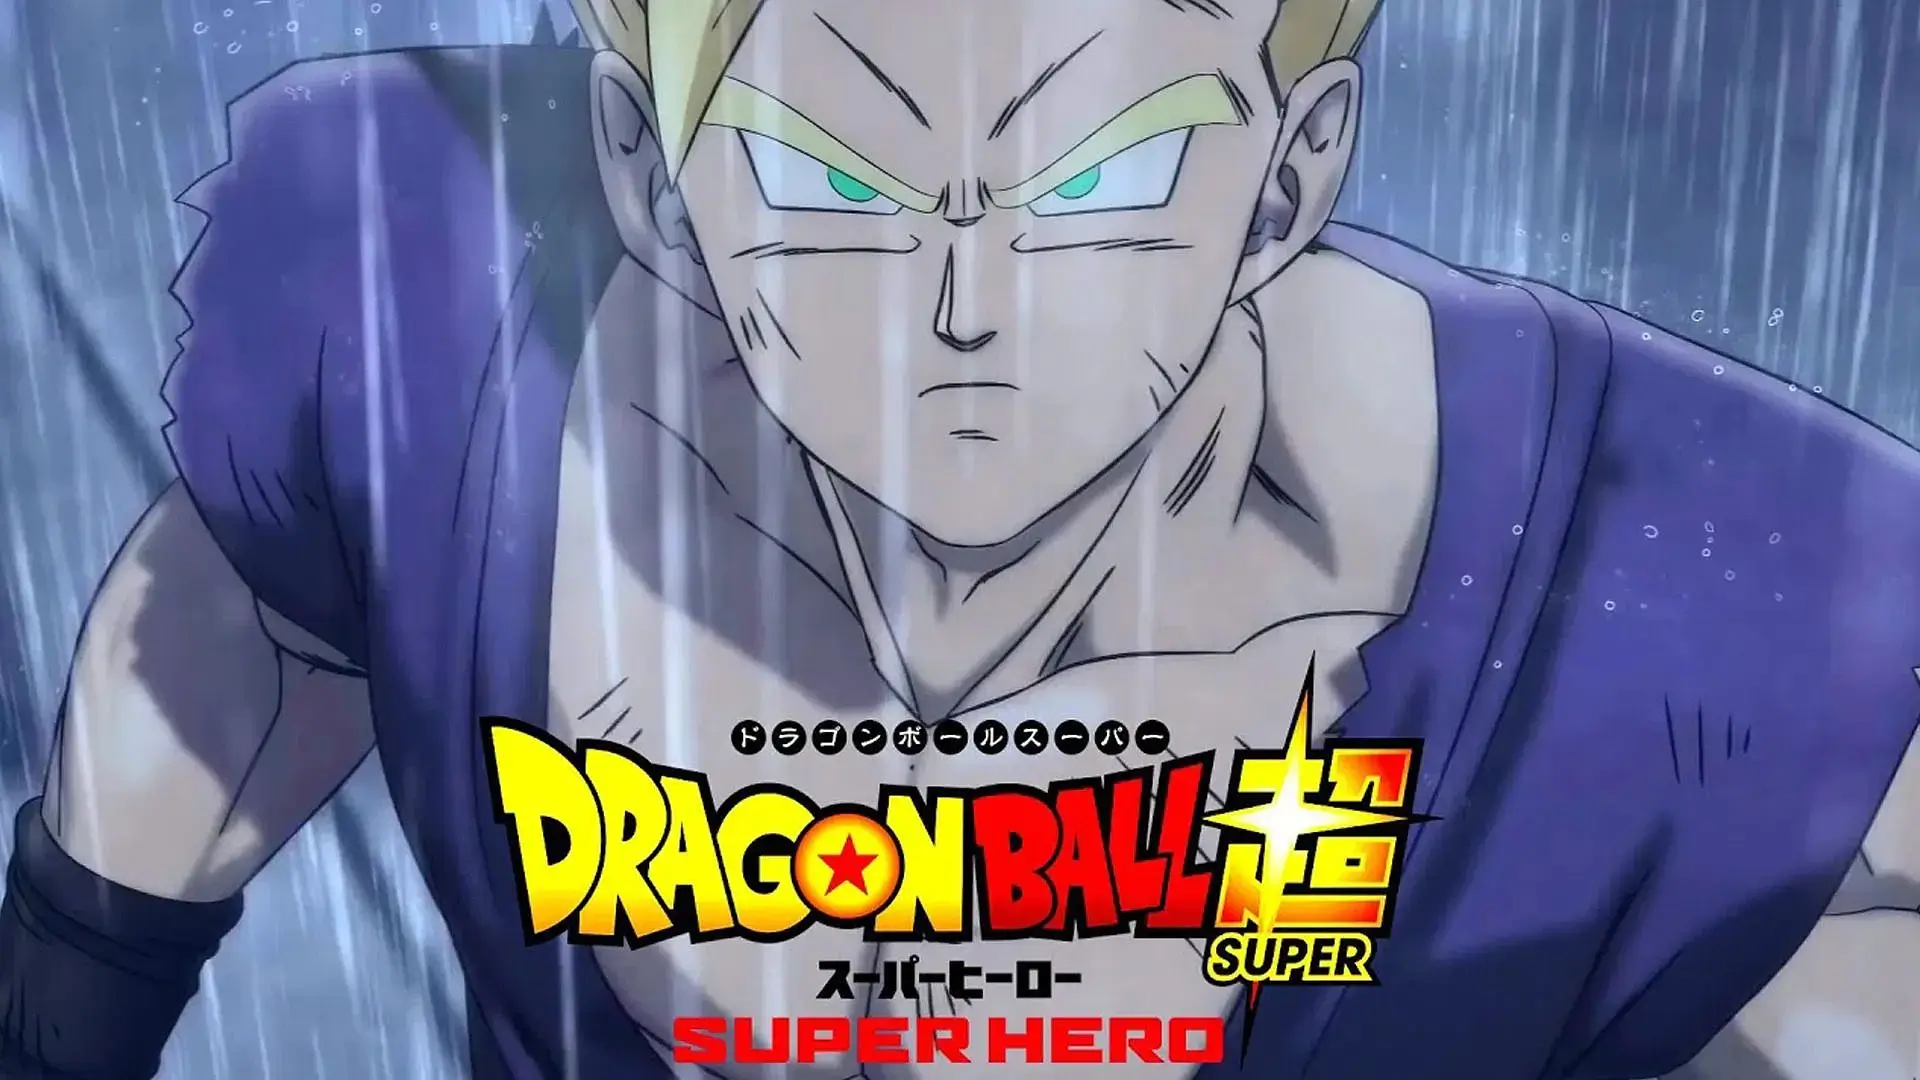 The Story Enters the SUPER HERO Arc! Volume 21 of the Dragon Ball